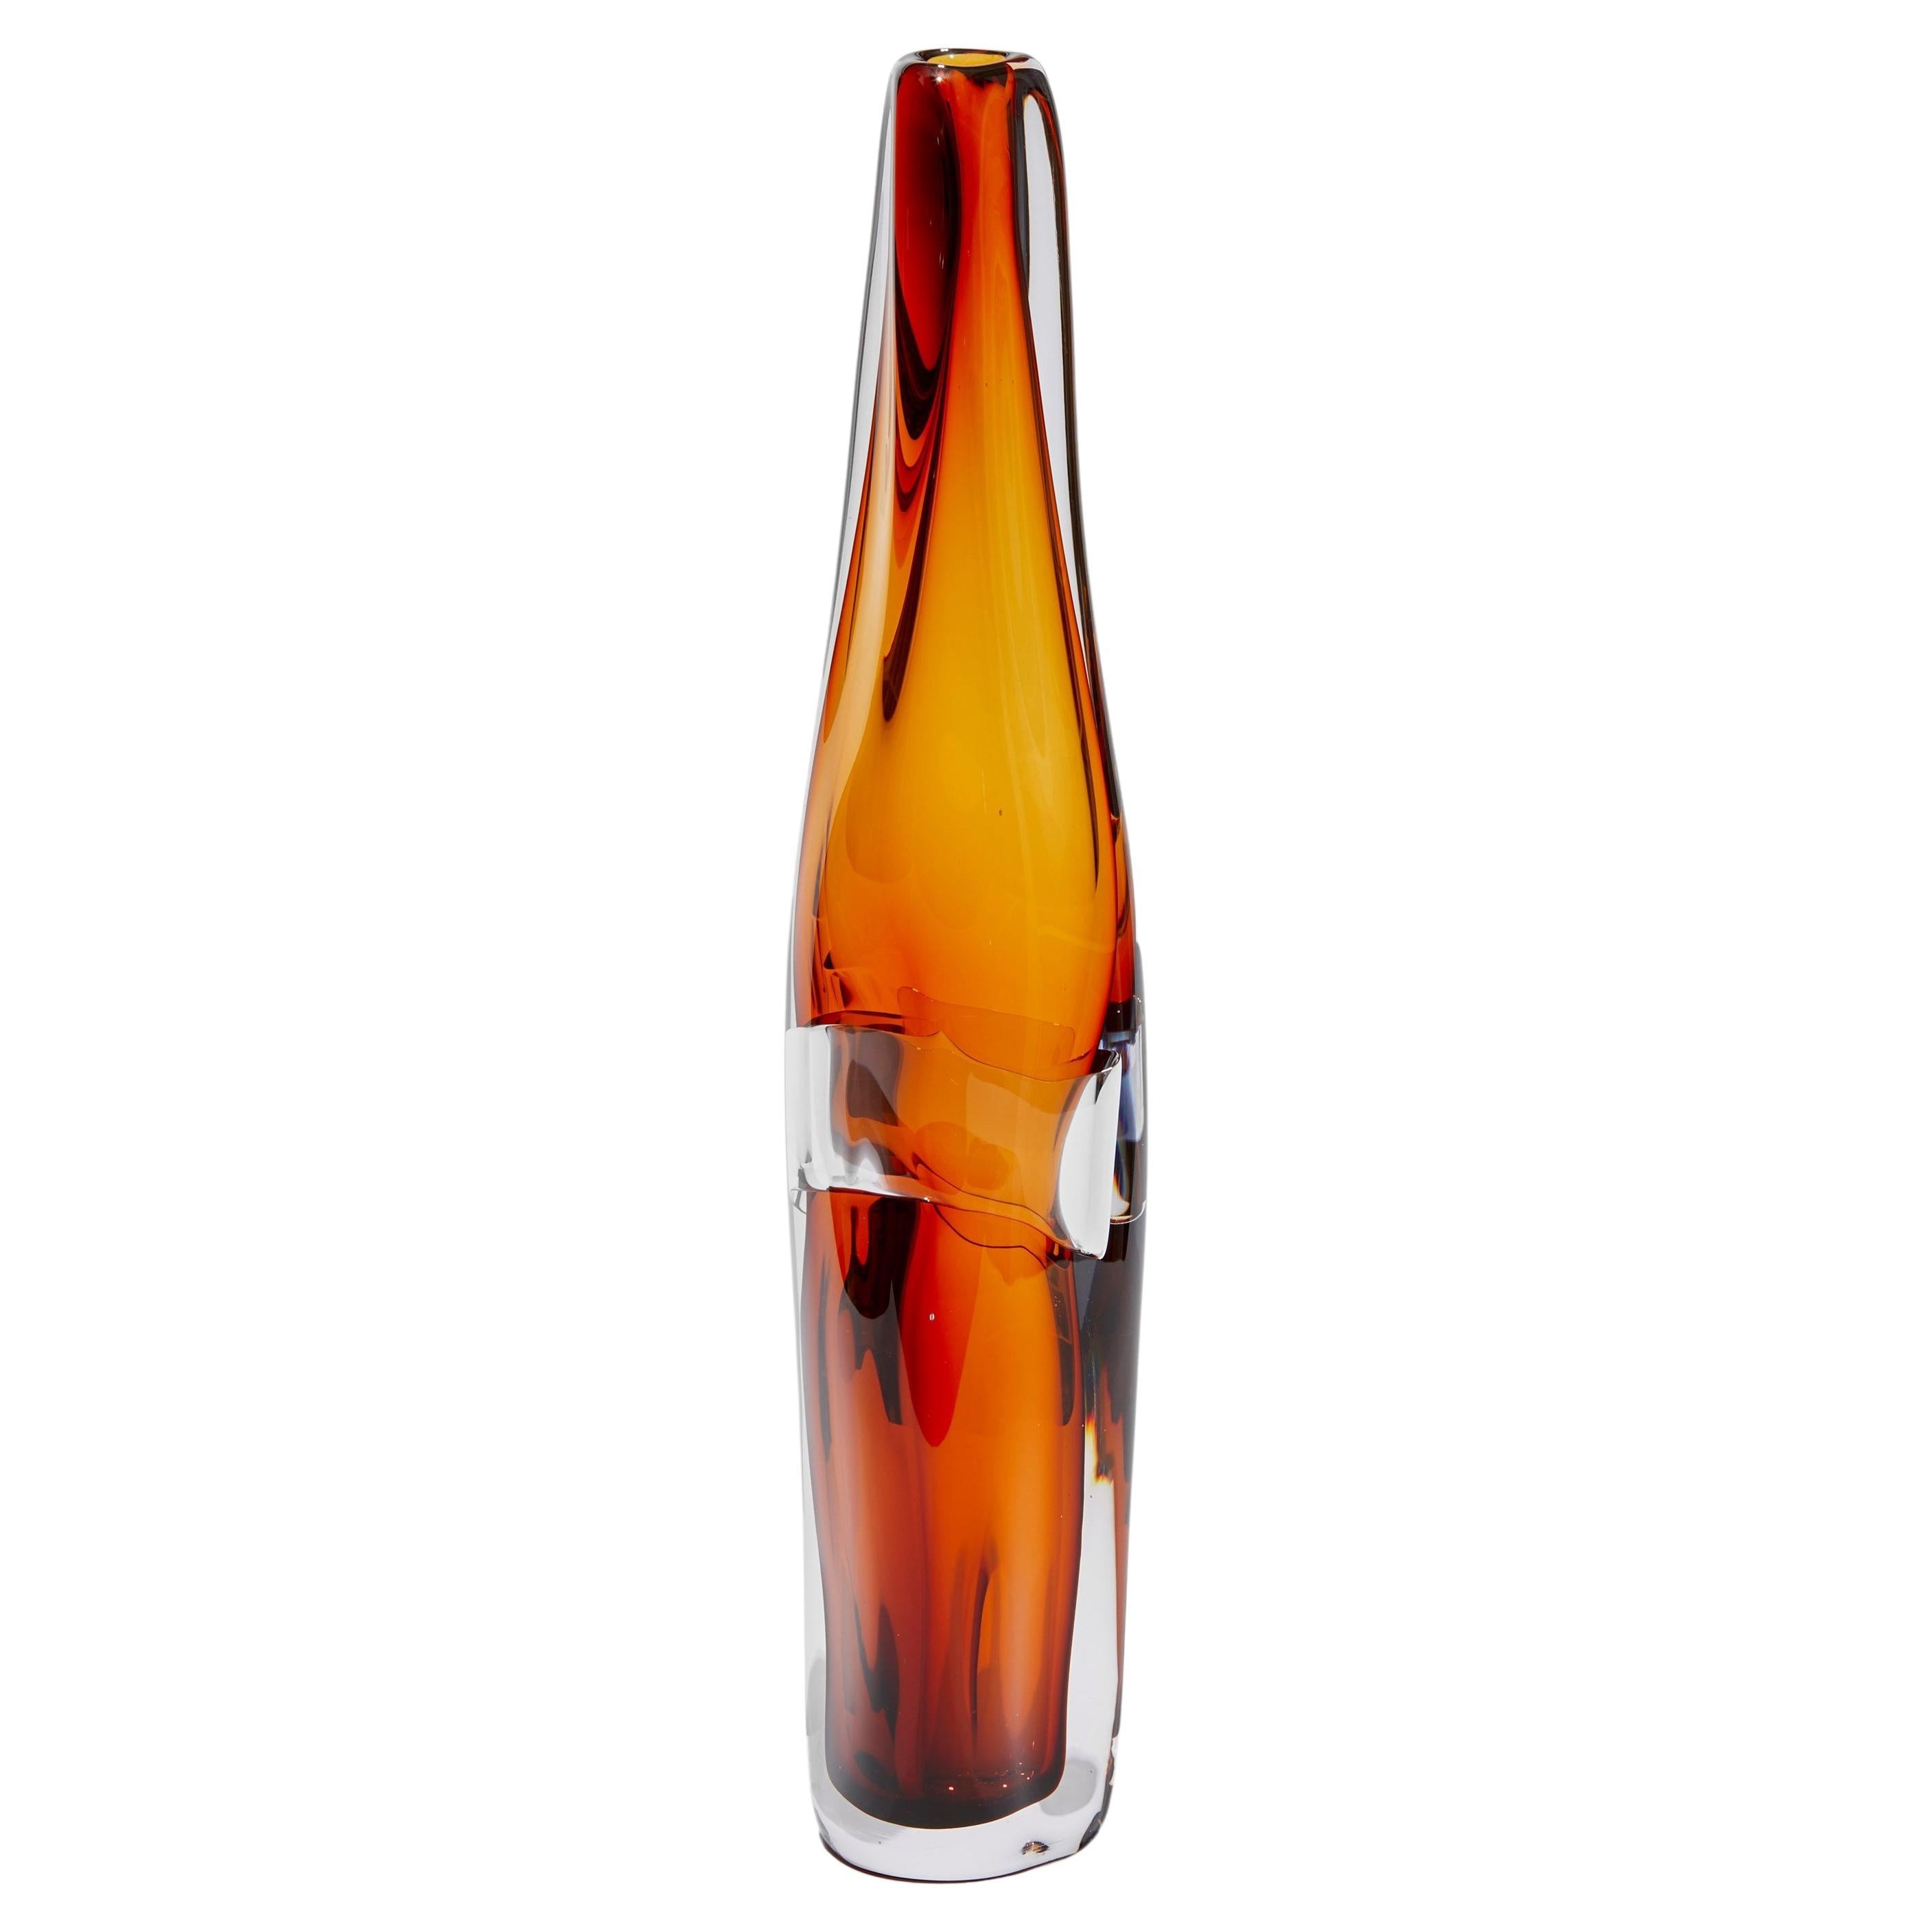  Sommarial in Aurora Gelblich, a rich amber abstract glass vase by Vic Bamforth